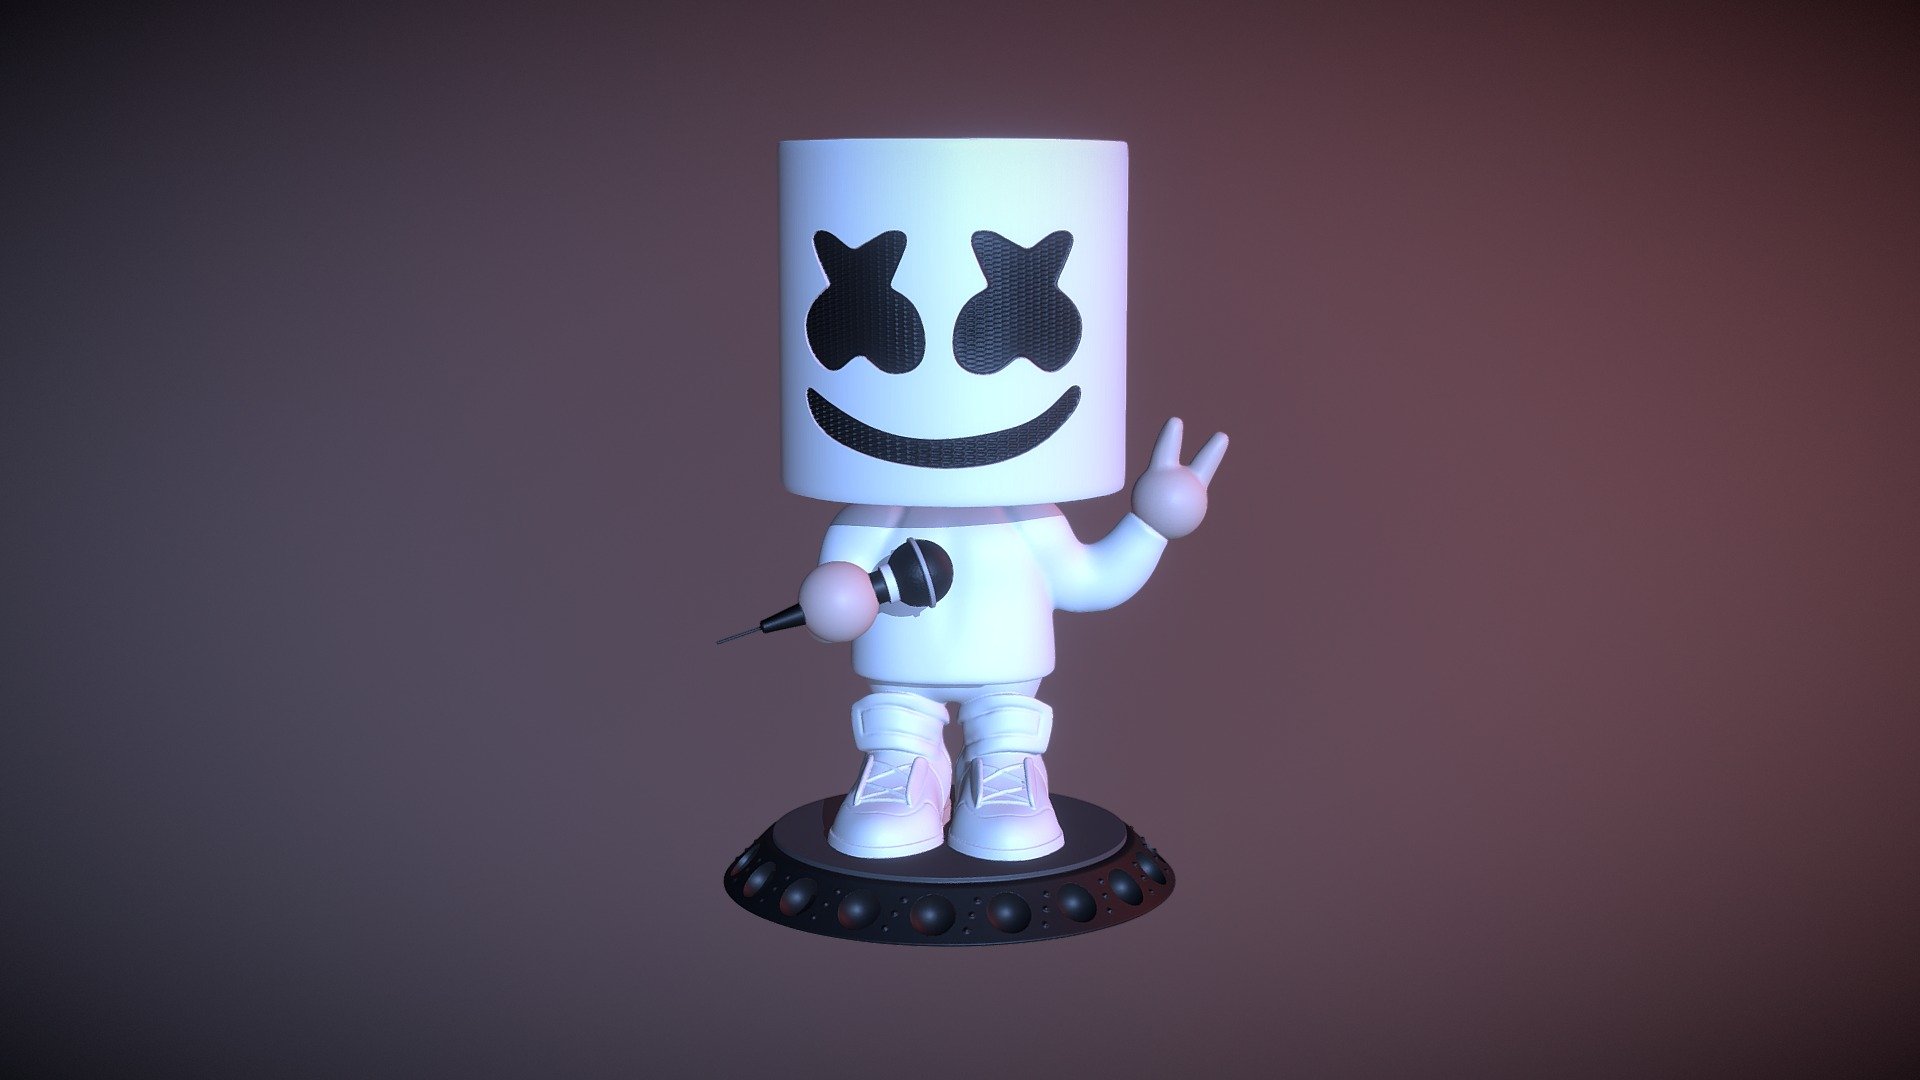 This is a quick sculpt I did in ZBrush 4R8 over a couple of days.
It is a cartoonish bobblehead of a dj named Marshmello.
I plan on having it 3d printed in the near future. Then I will add the spring 3d model